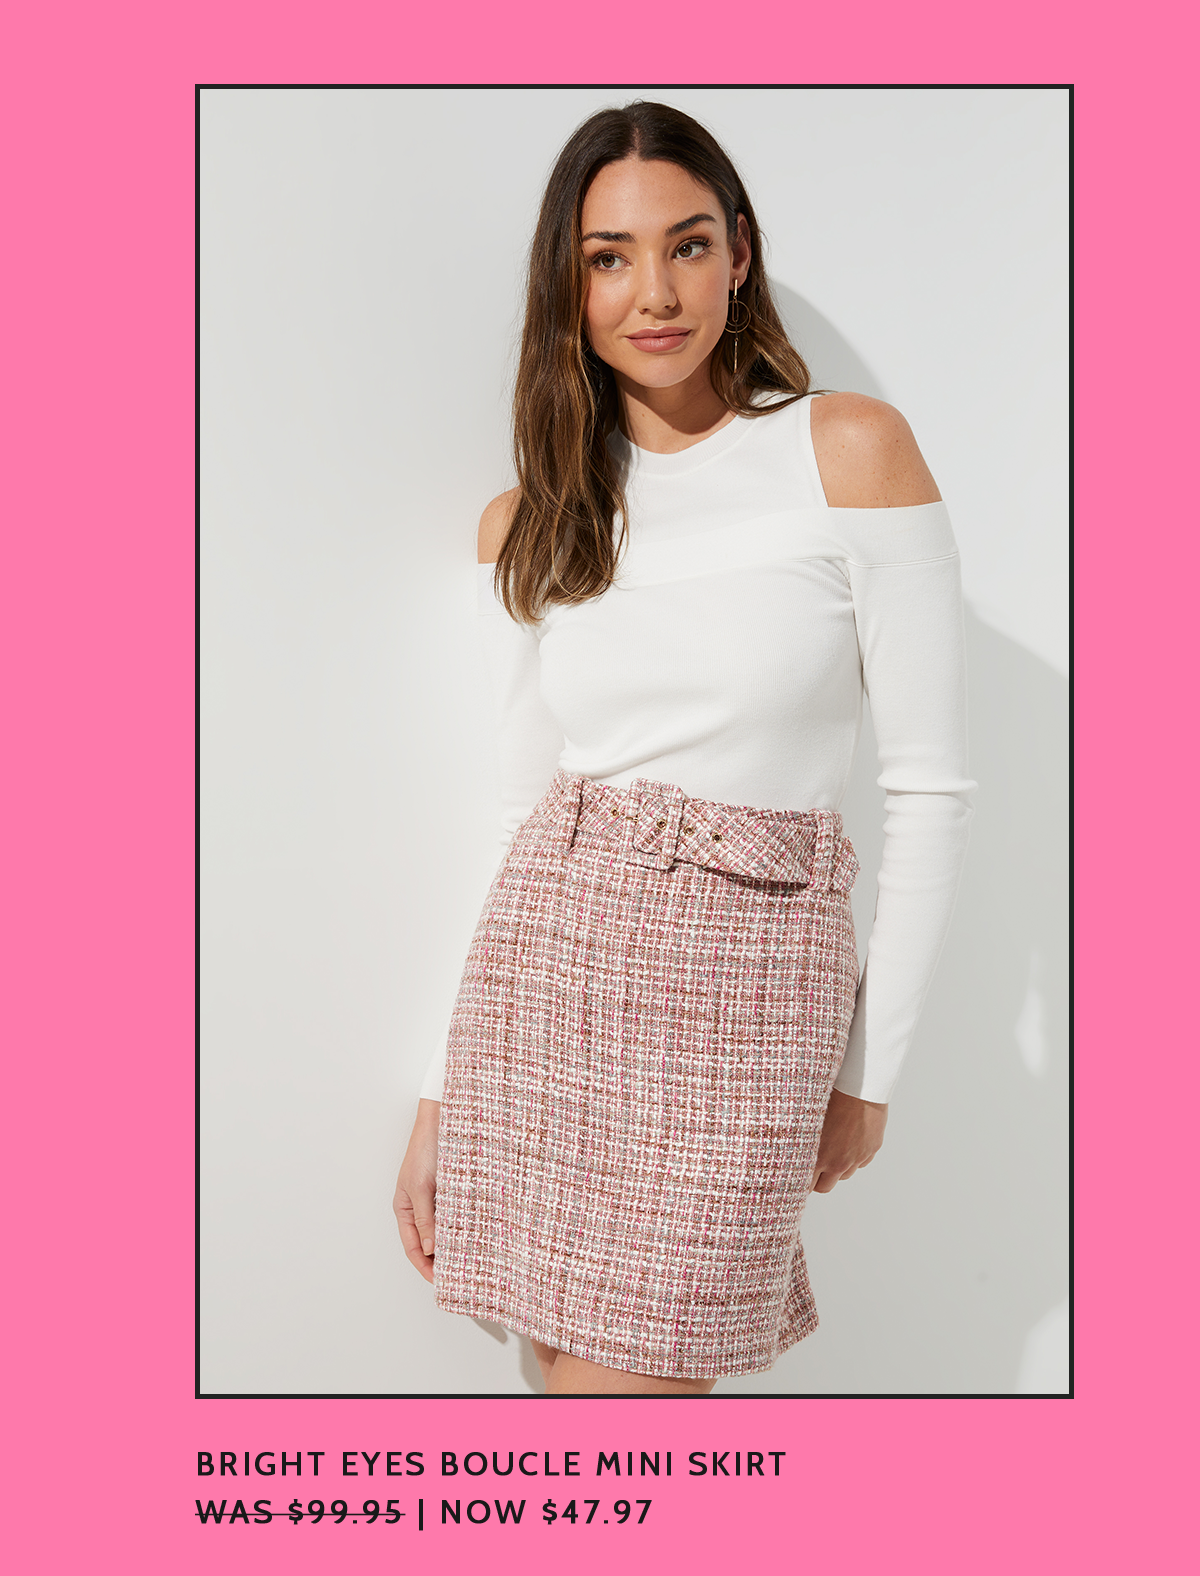 BRIGHT EYES BOUCLE MINI SKIRT  WAS $99.95 | NOW $47.97